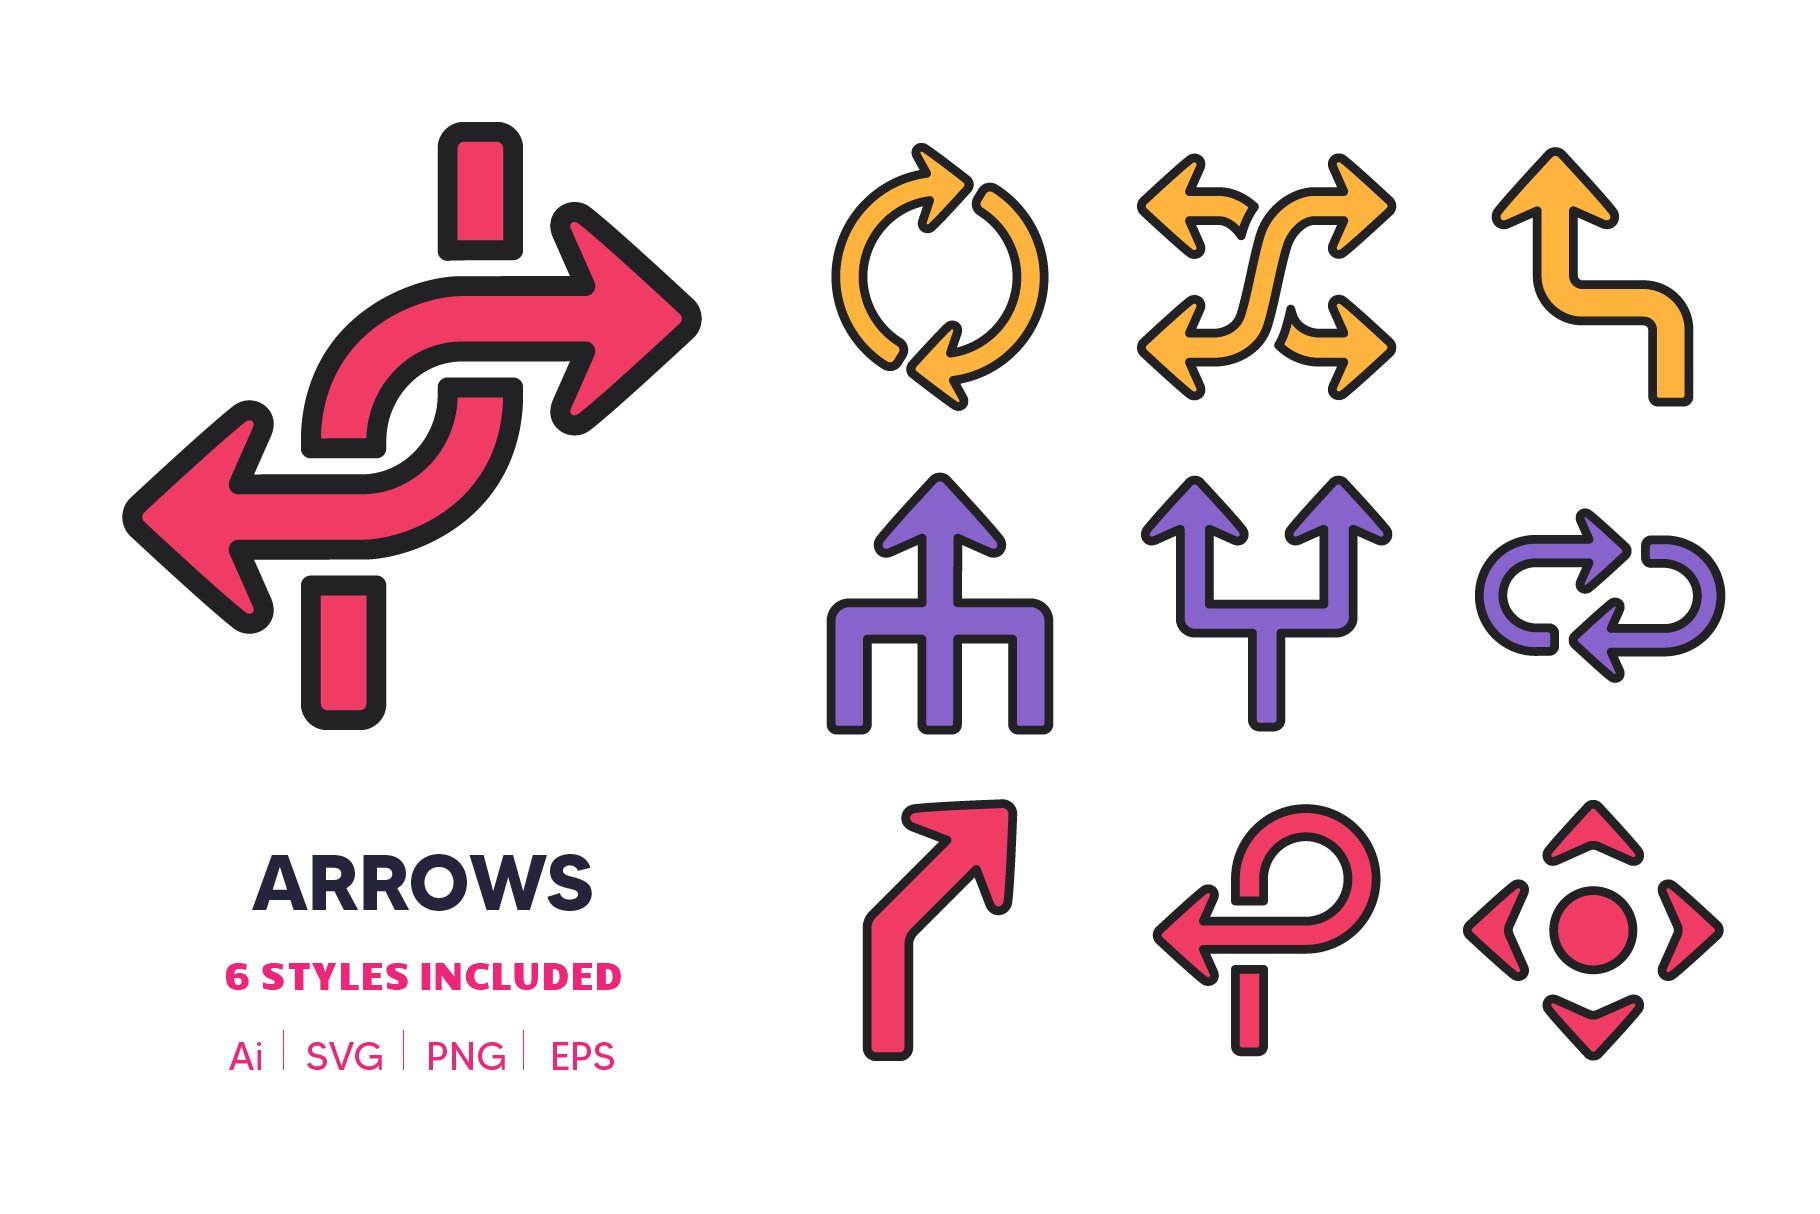 100 Arrow Icons cover image.